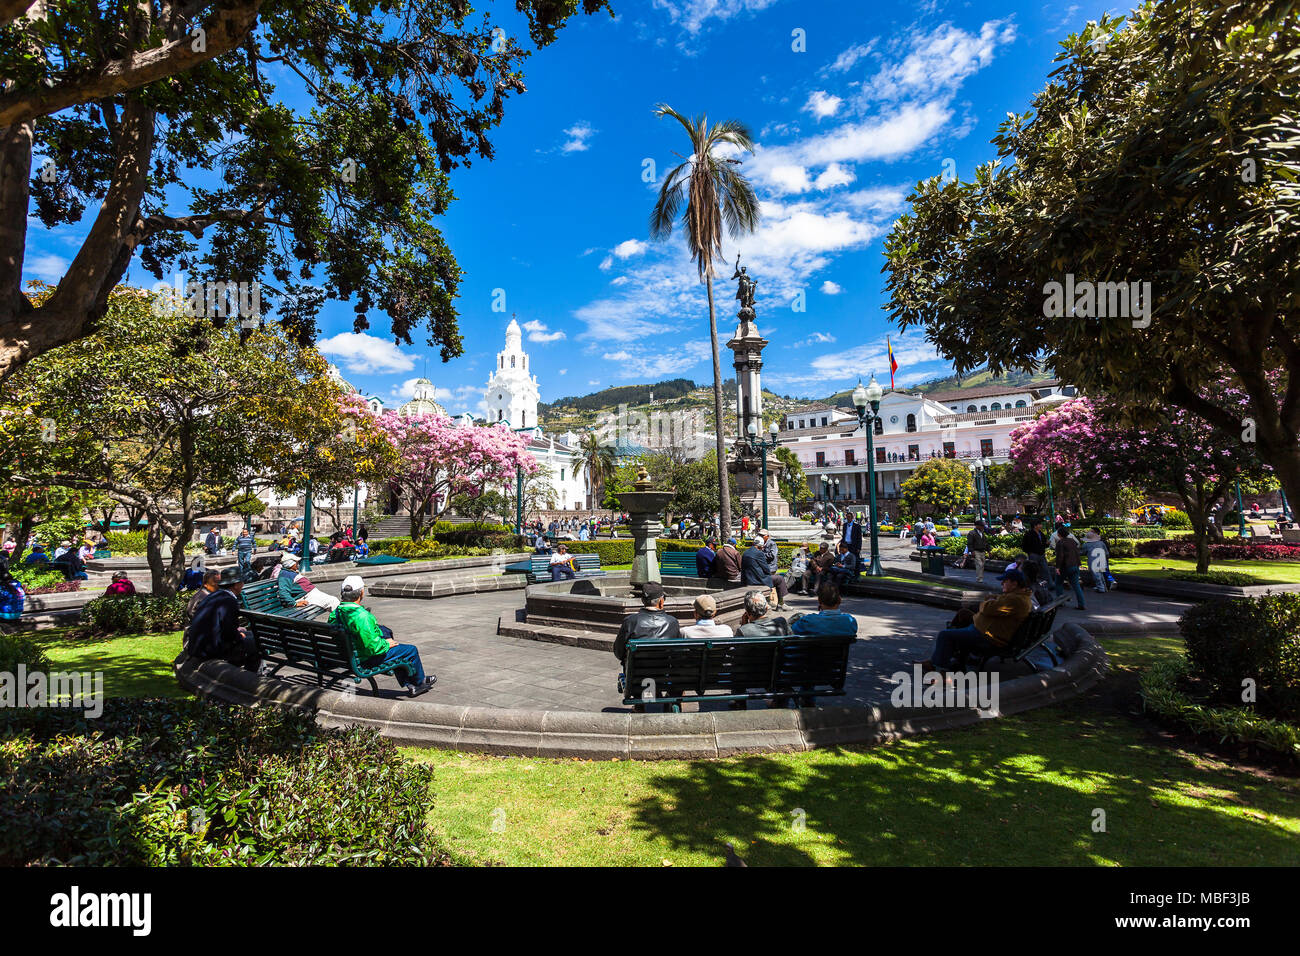 QUITO, ECUADOR - 30 JUNE, 2015: Tourists and residents rest on the benches in the Plaza de la Independencia in Quito after touring the city streets Stock Photo